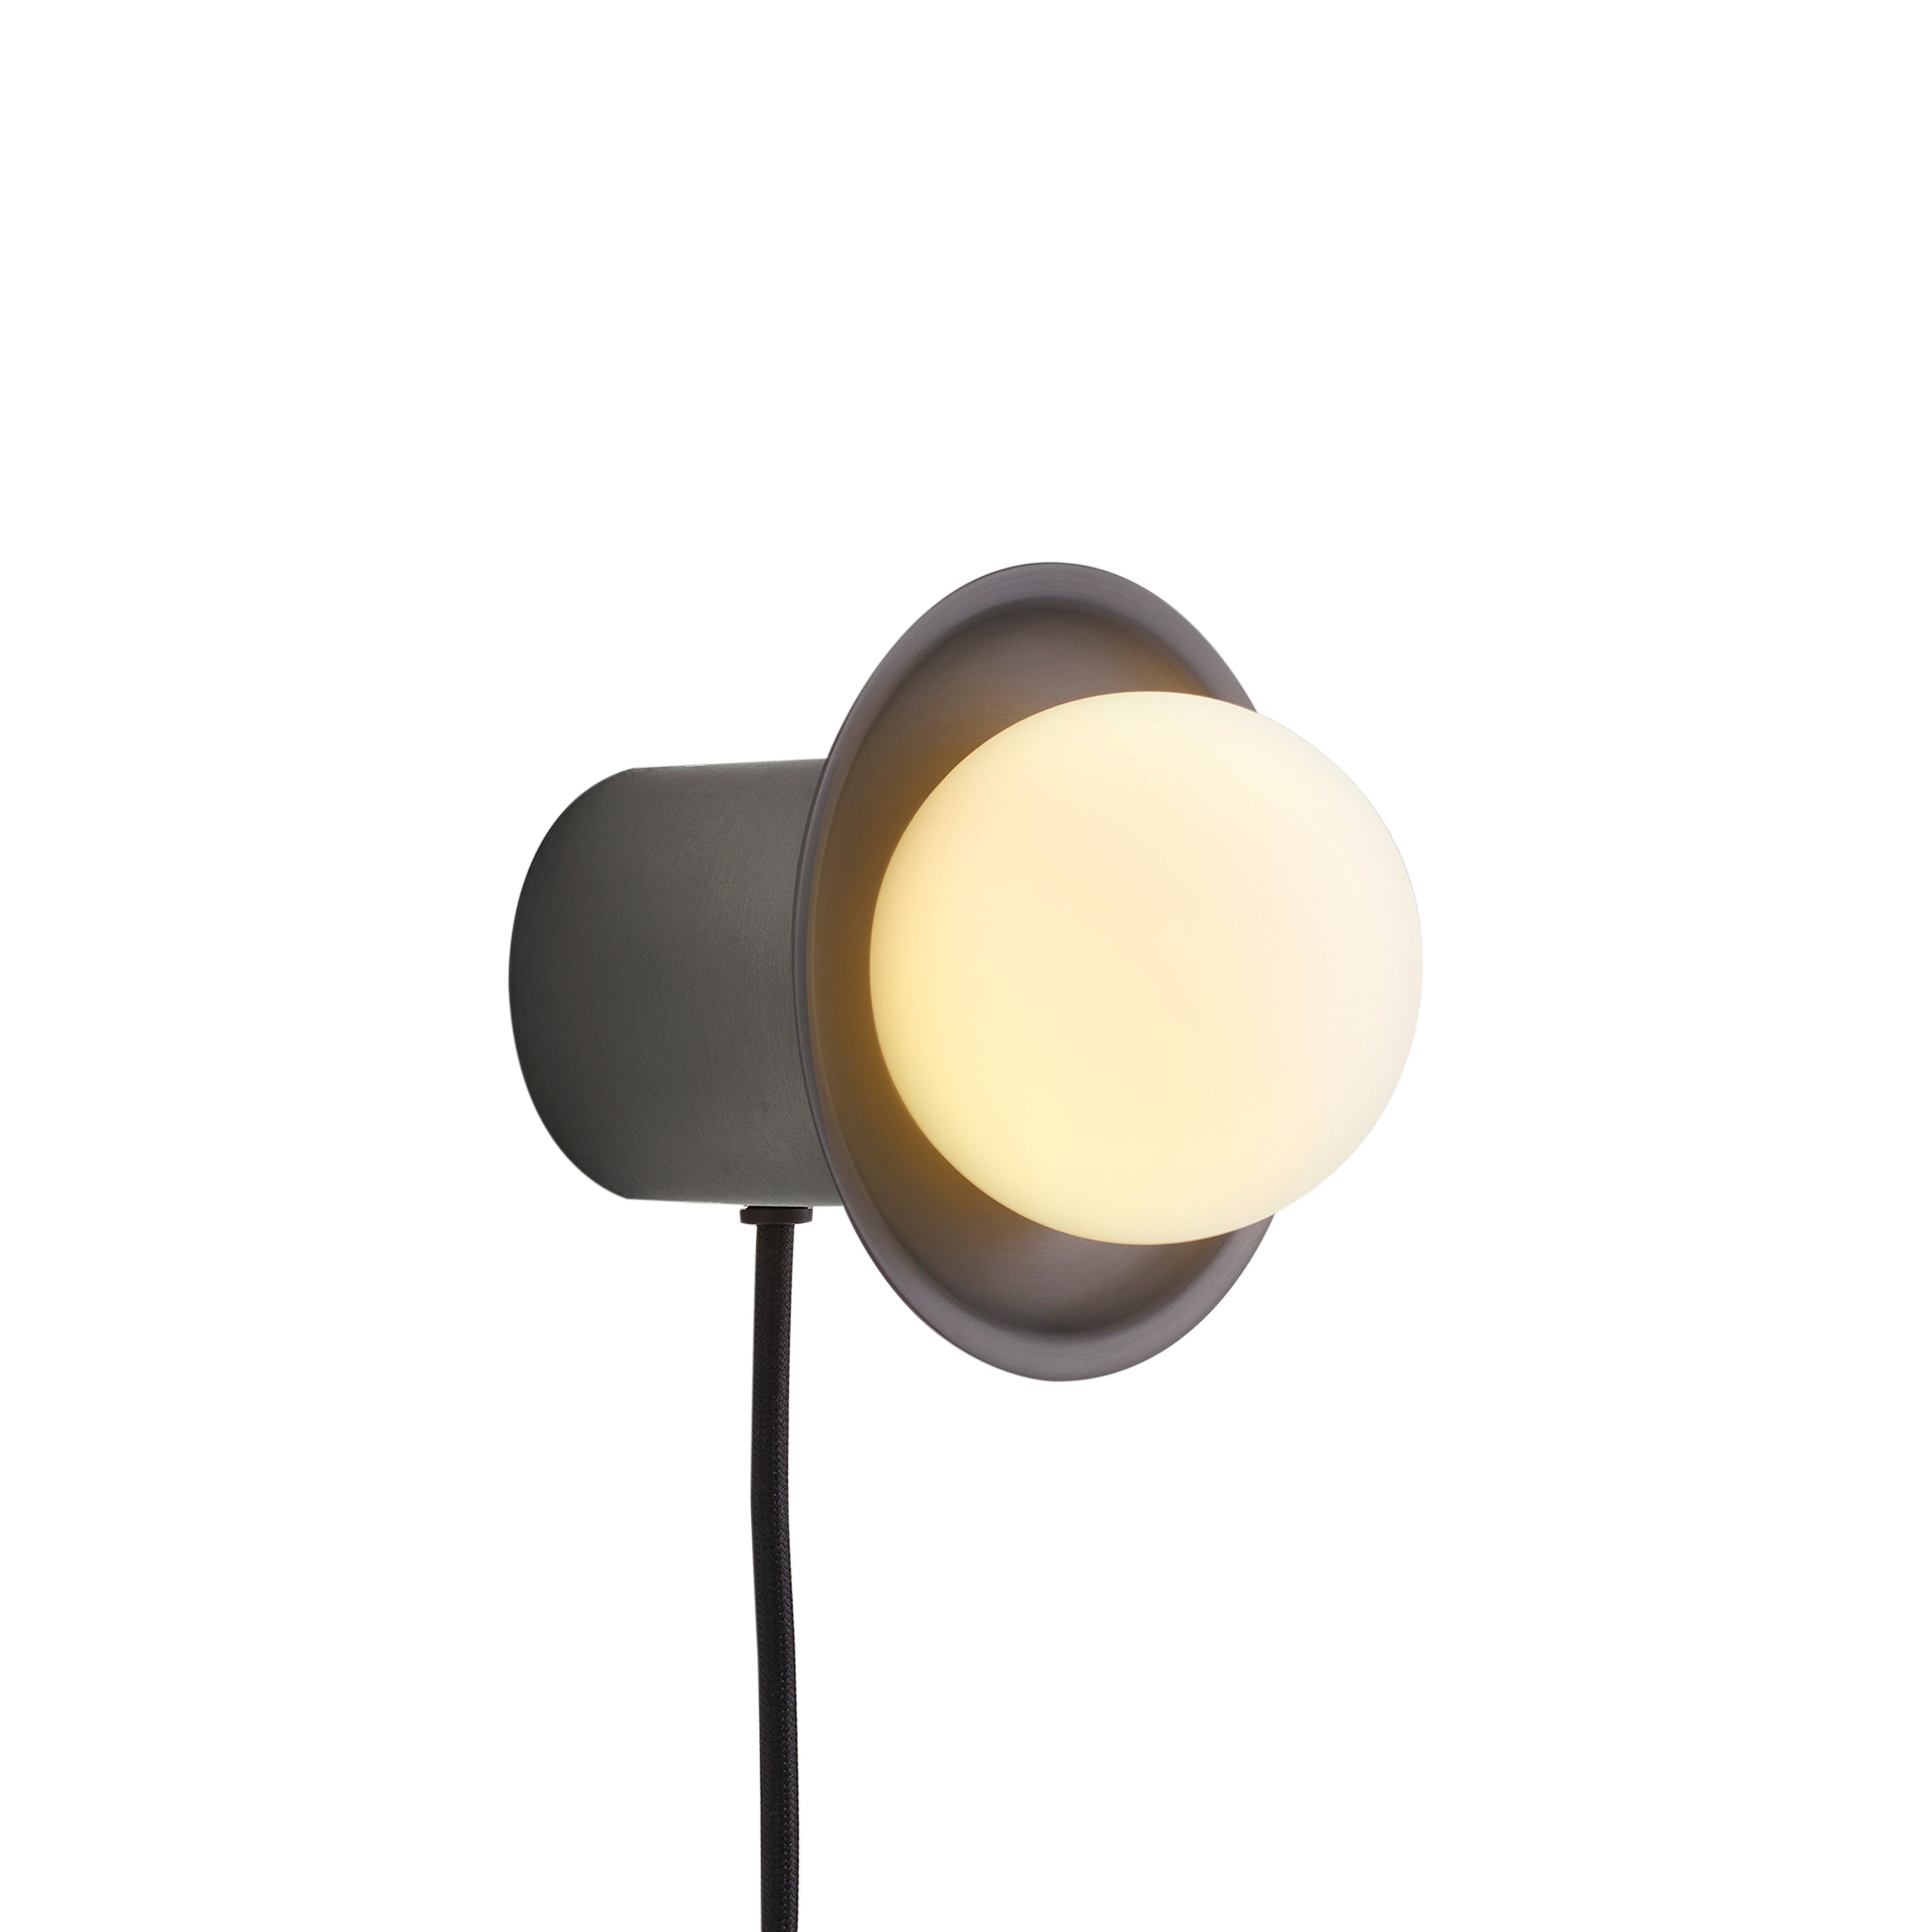 Janed Wall Light with Cable: Satin Graphite + Satin Graphite